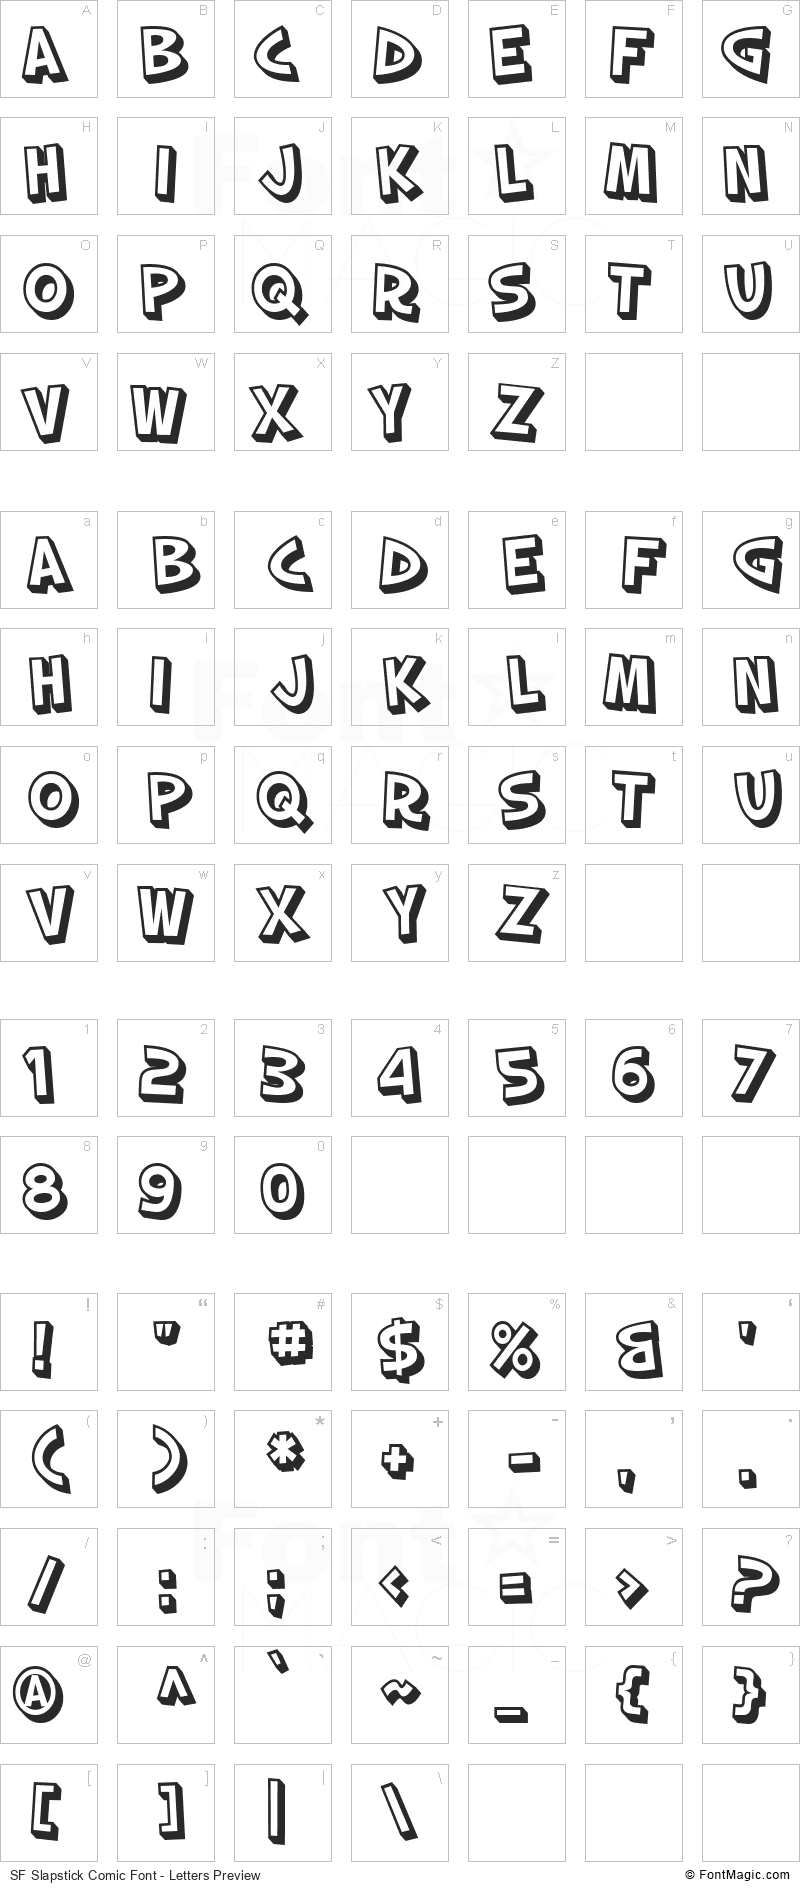 SF Slapstick Comic Font - All Latters Preview Chart